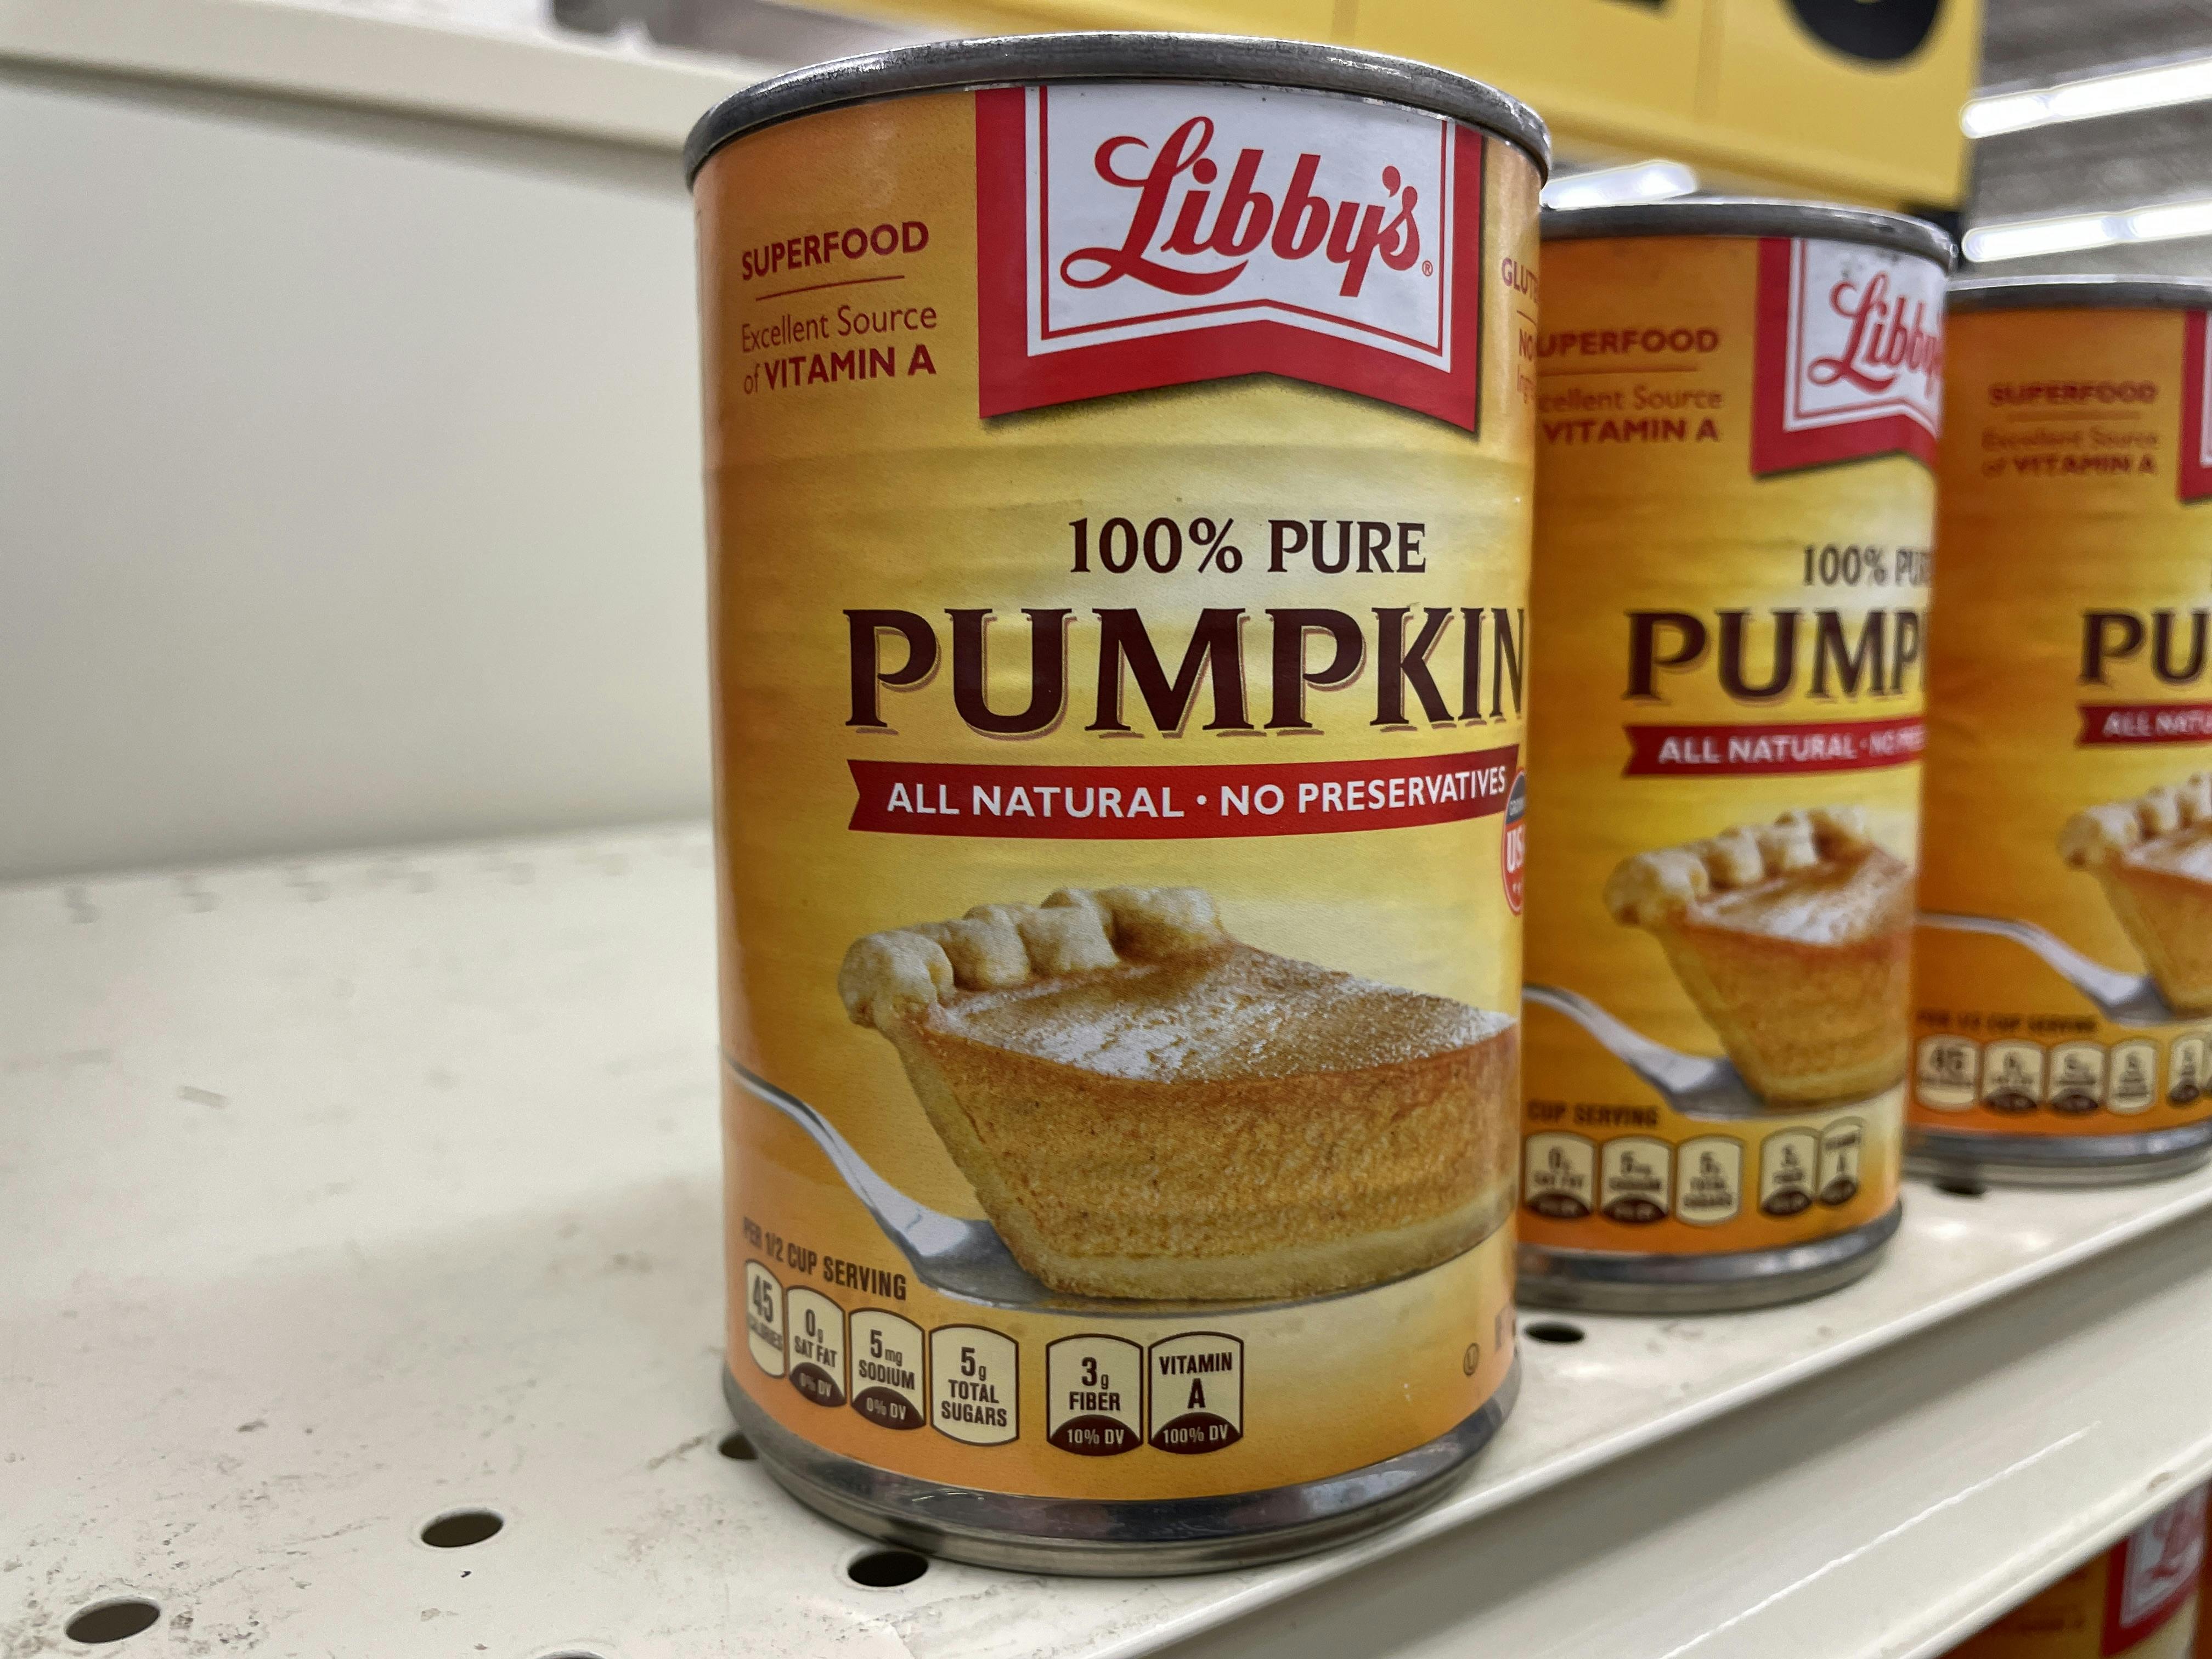 Three cans of Libby's canned pumpkin on a store shelf.